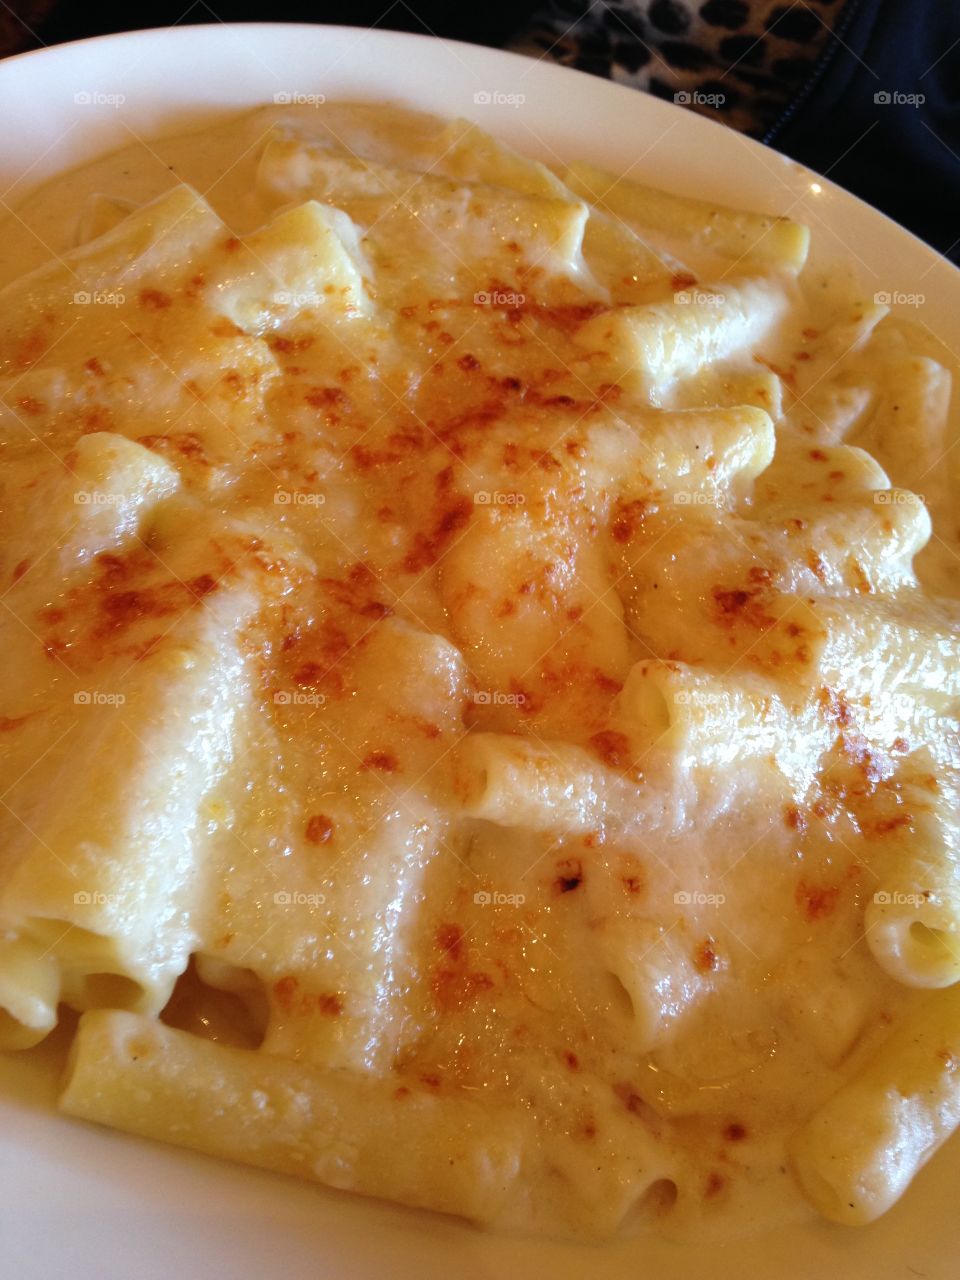 Mac and Cheese
